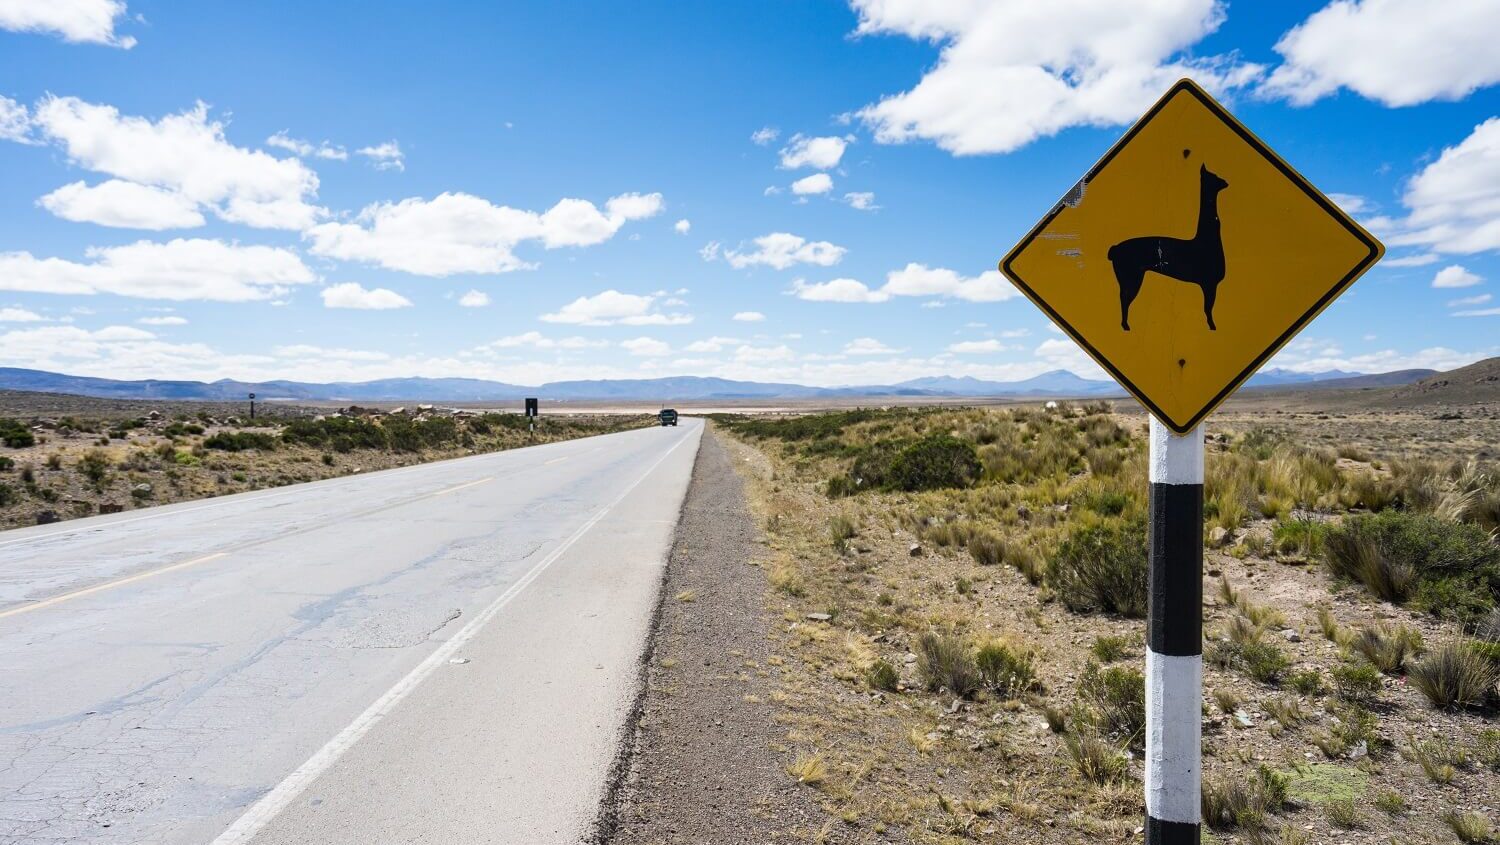 Sign of crossing lama's on the route from Arequipa to the Colca Canyon - RESPONSible Travel Peru